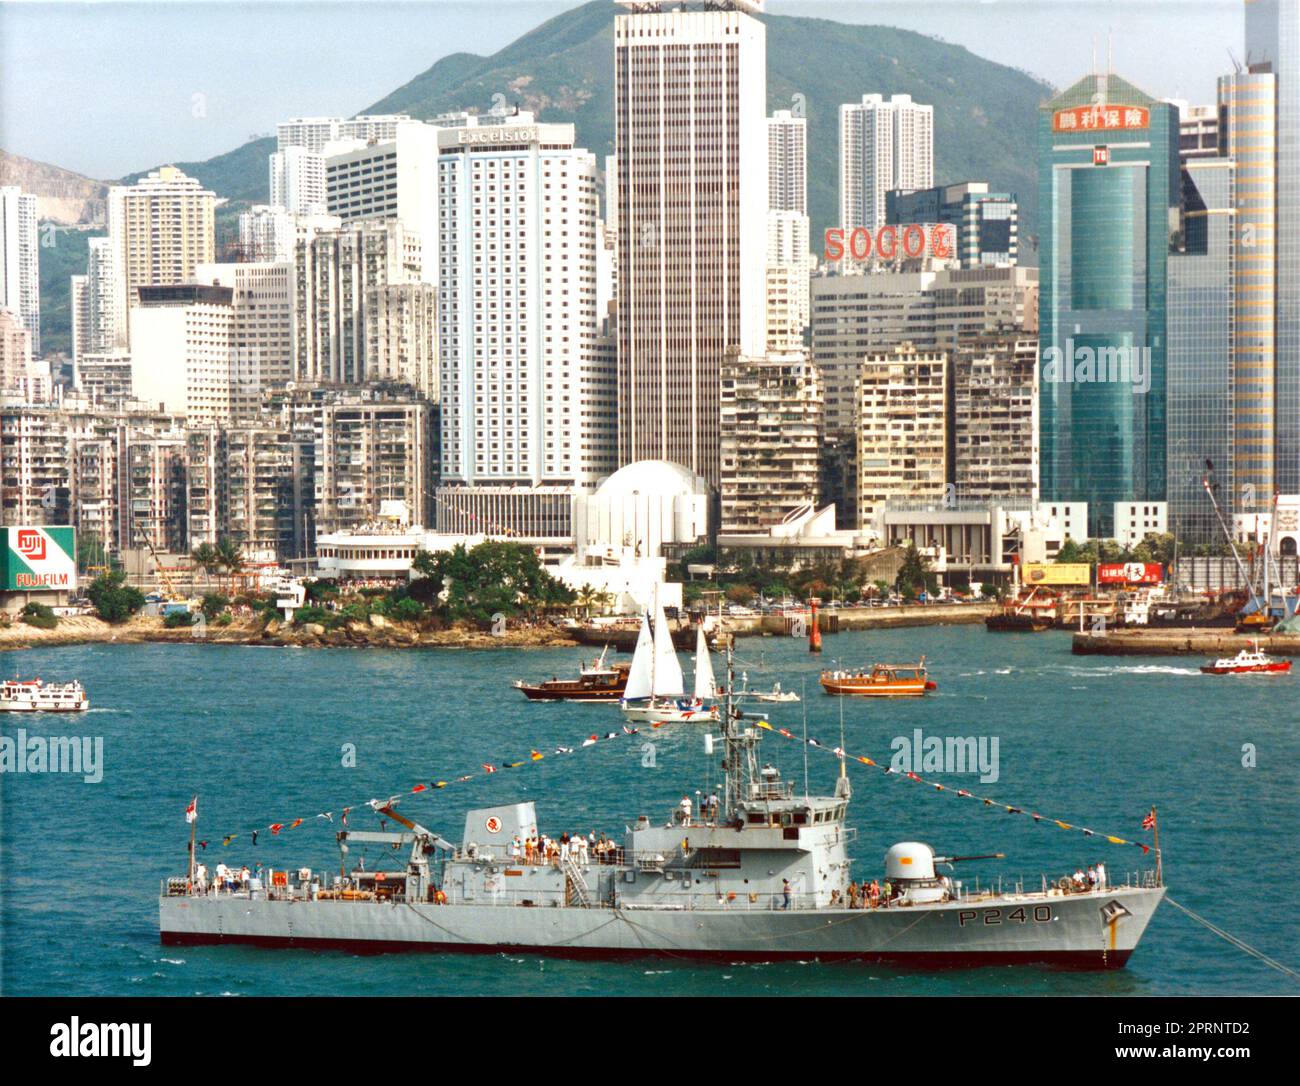 HMS Plover (P240), dressed overall as guardship for an event at the Royal Hong Kong Yacht Club, circa 1996, before the handover to China in 1997. Stock Photo